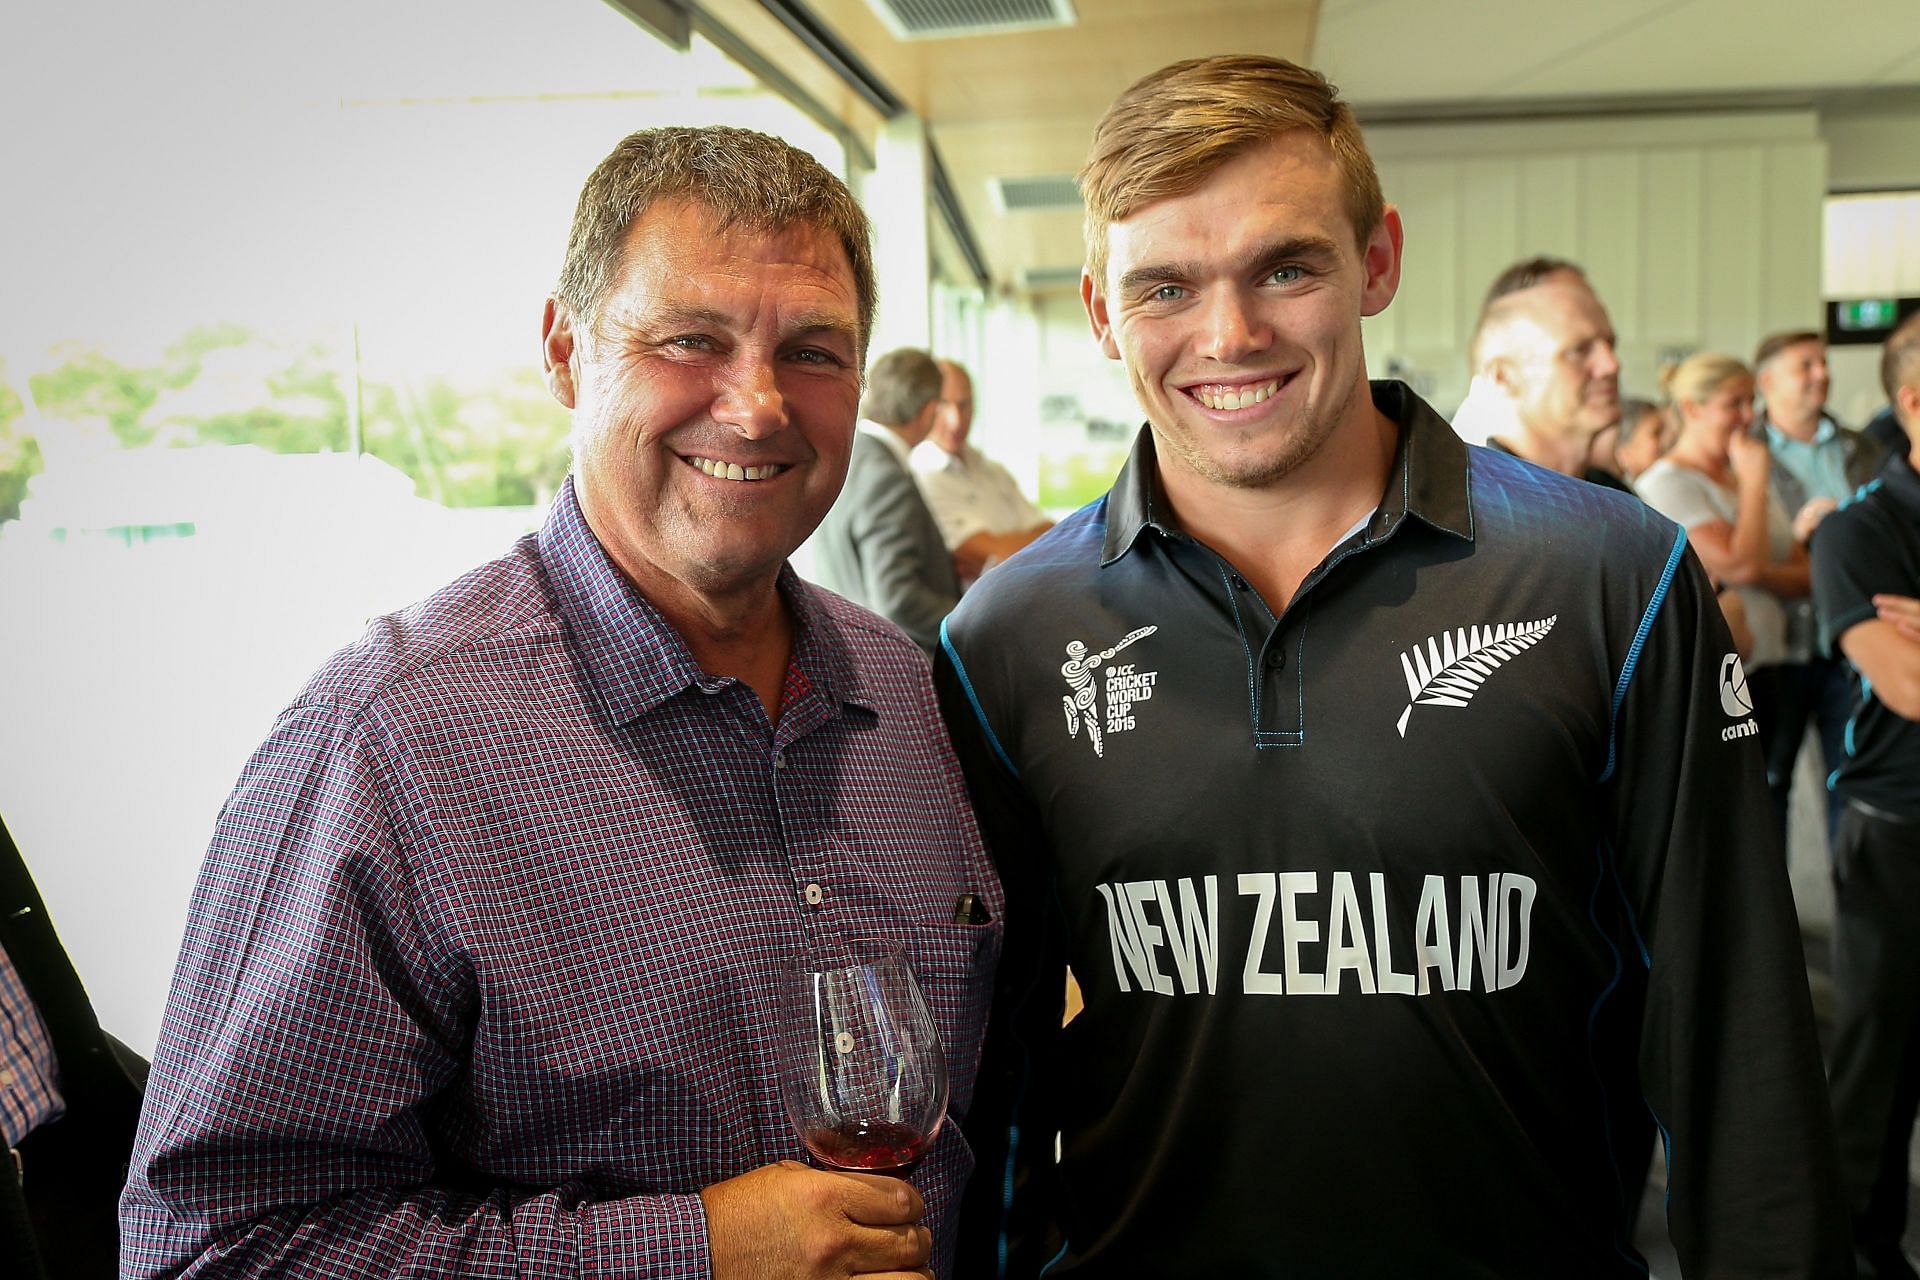 Tom Latham (right) poses with his father Rod Latham. (Pic: Getty Images)